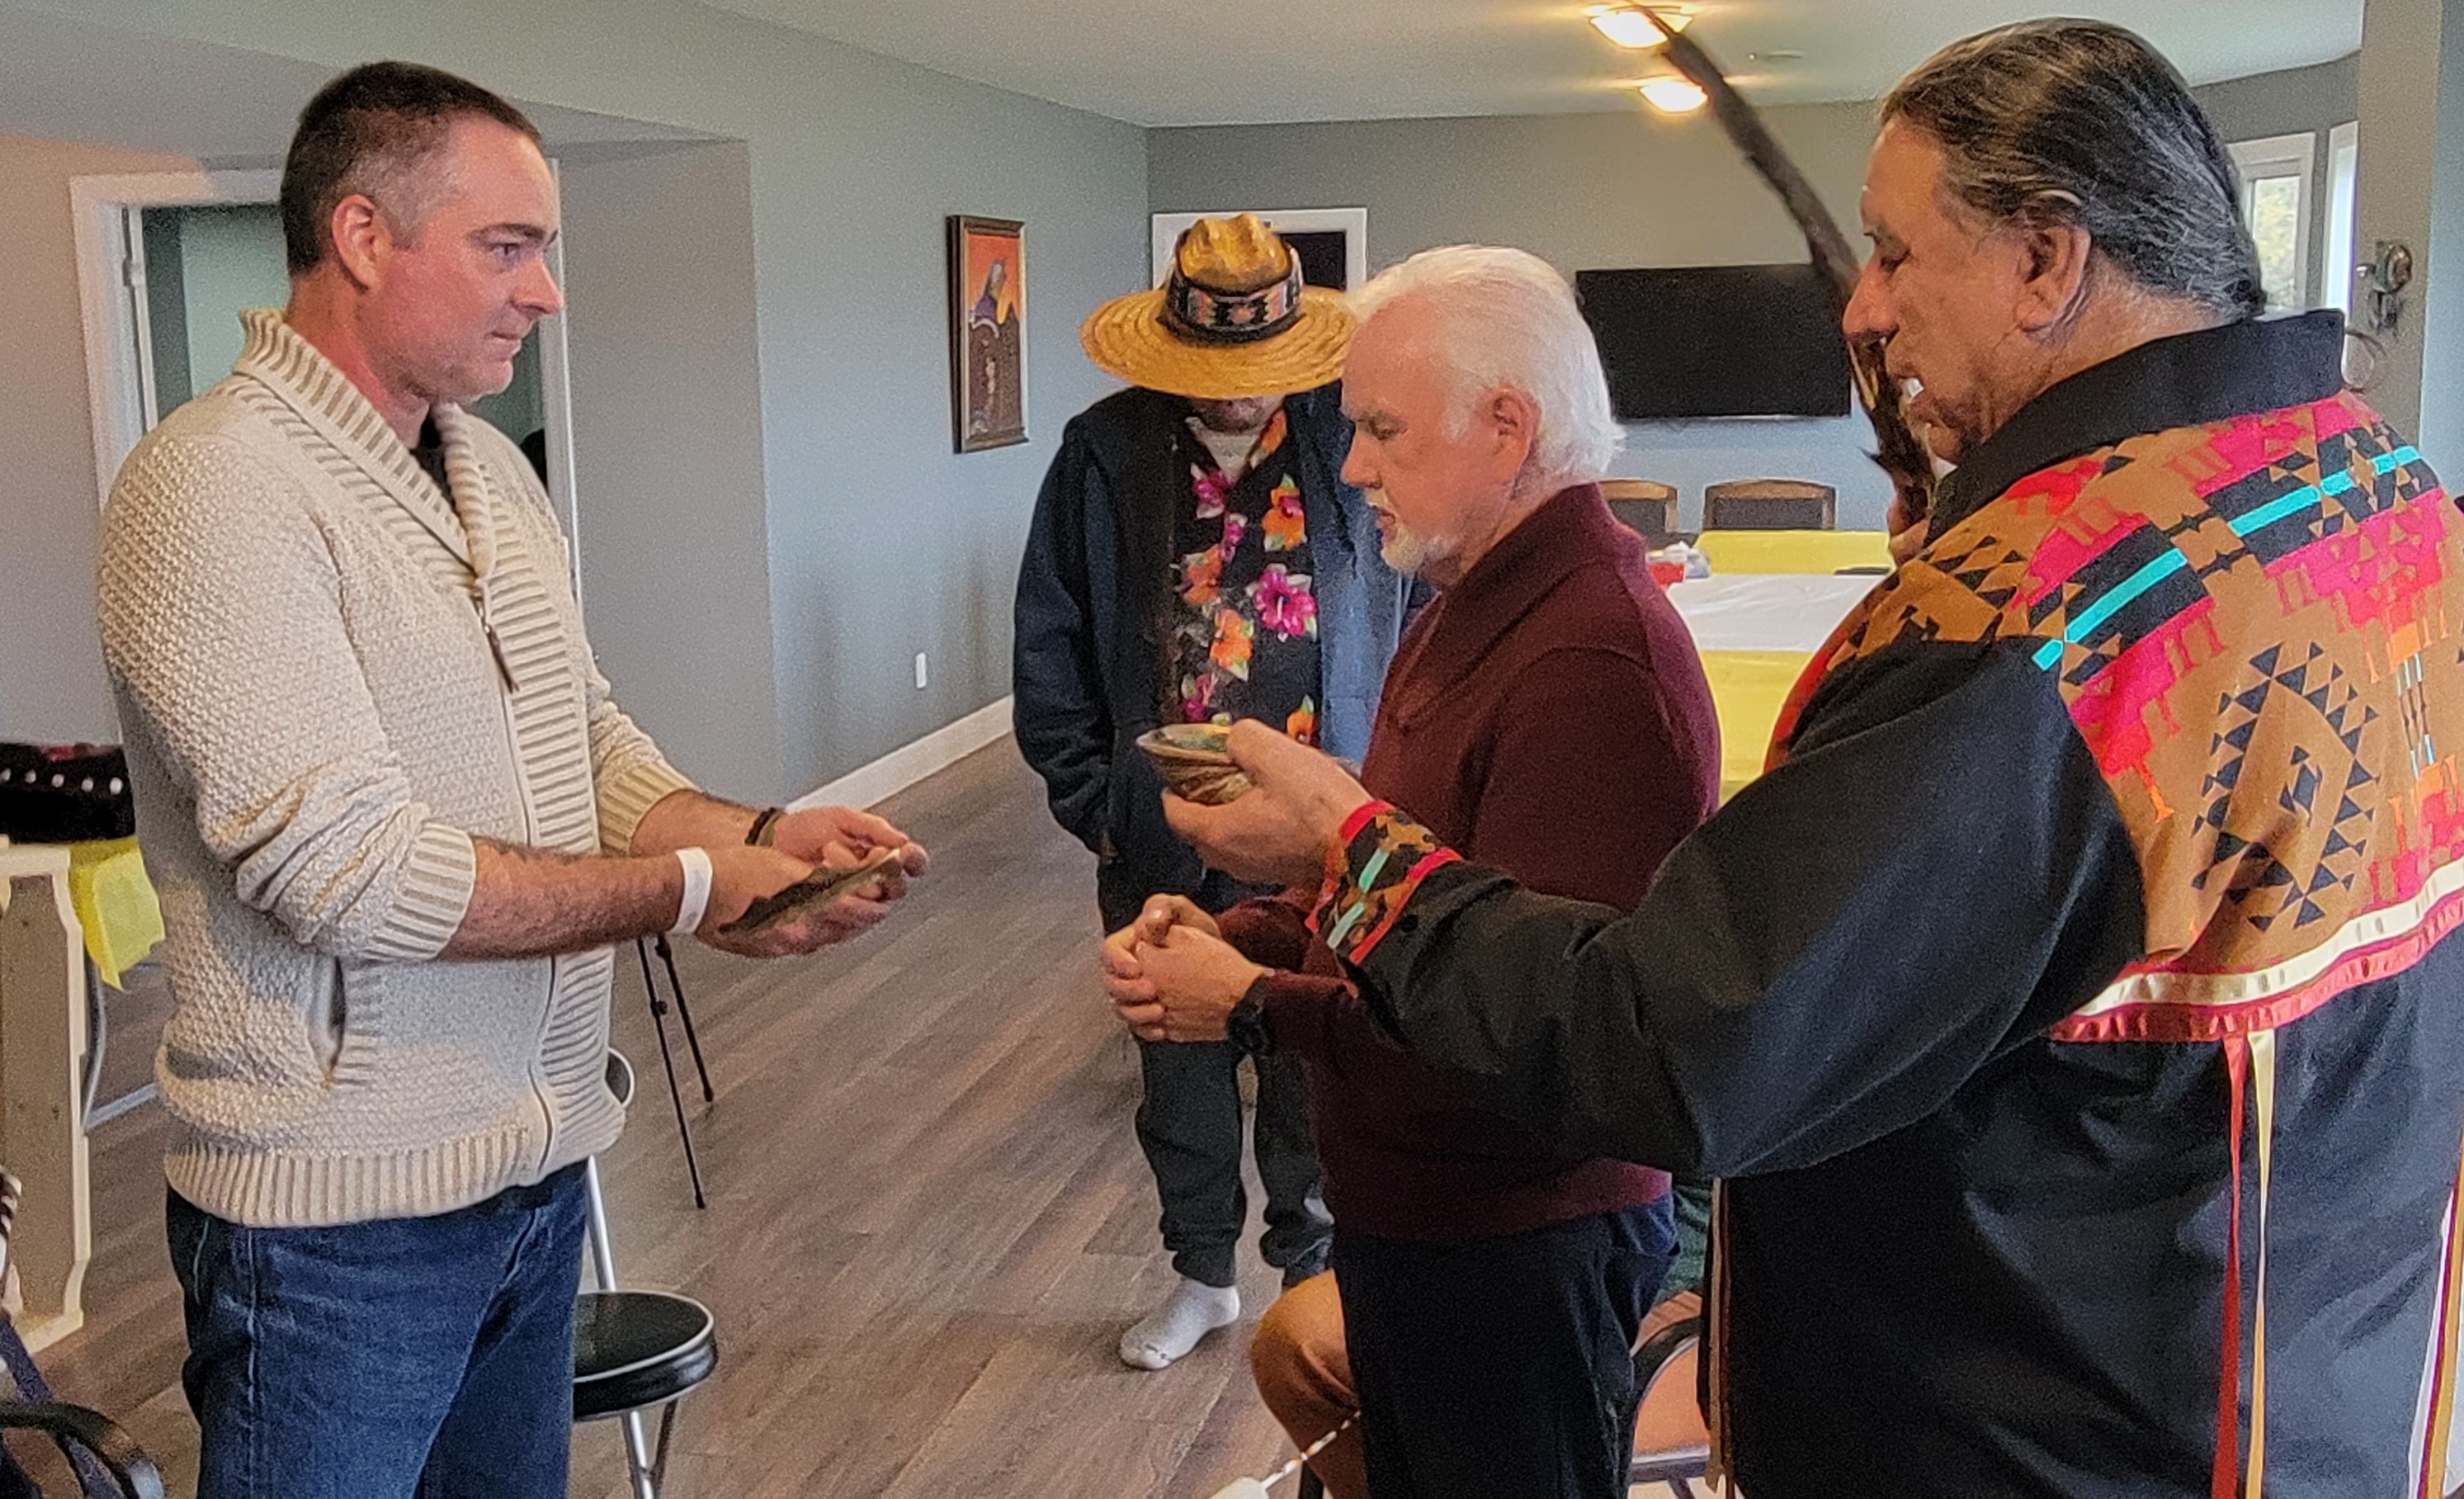 Chief Roger Augustine gifts Brad Loiselle an Eagle Feather with peace and friendship